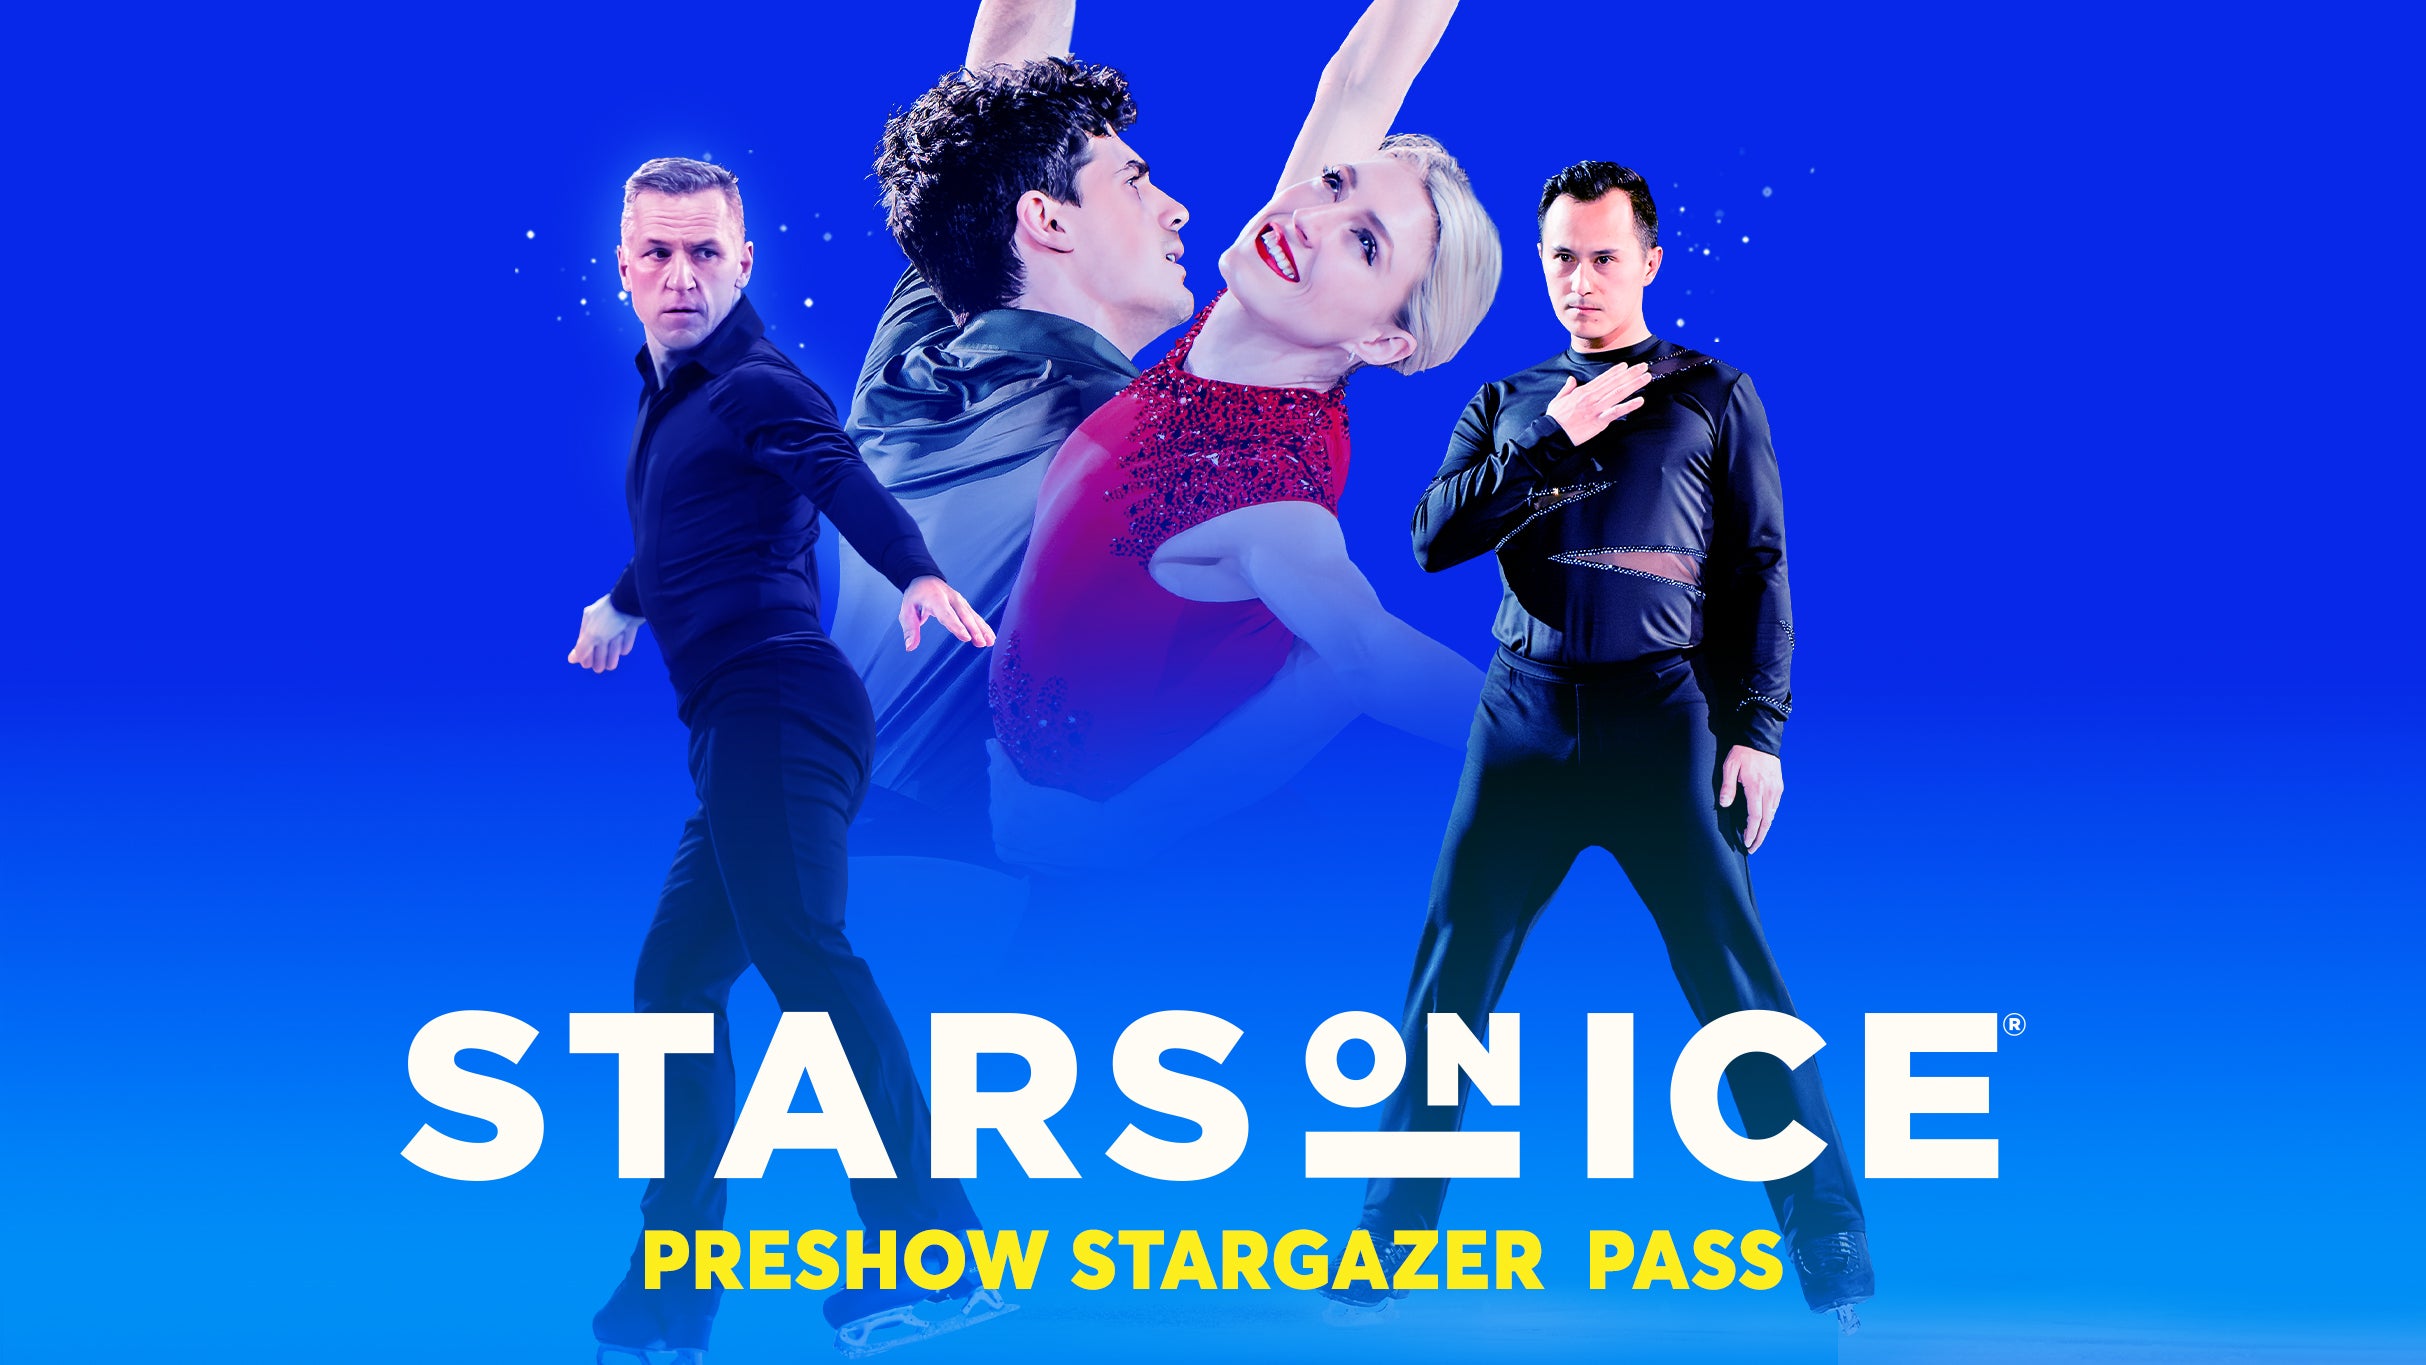 Stars On Ice Pre-Show Stargazer Pass in Halifax promo photo for Exclusive presale offer code